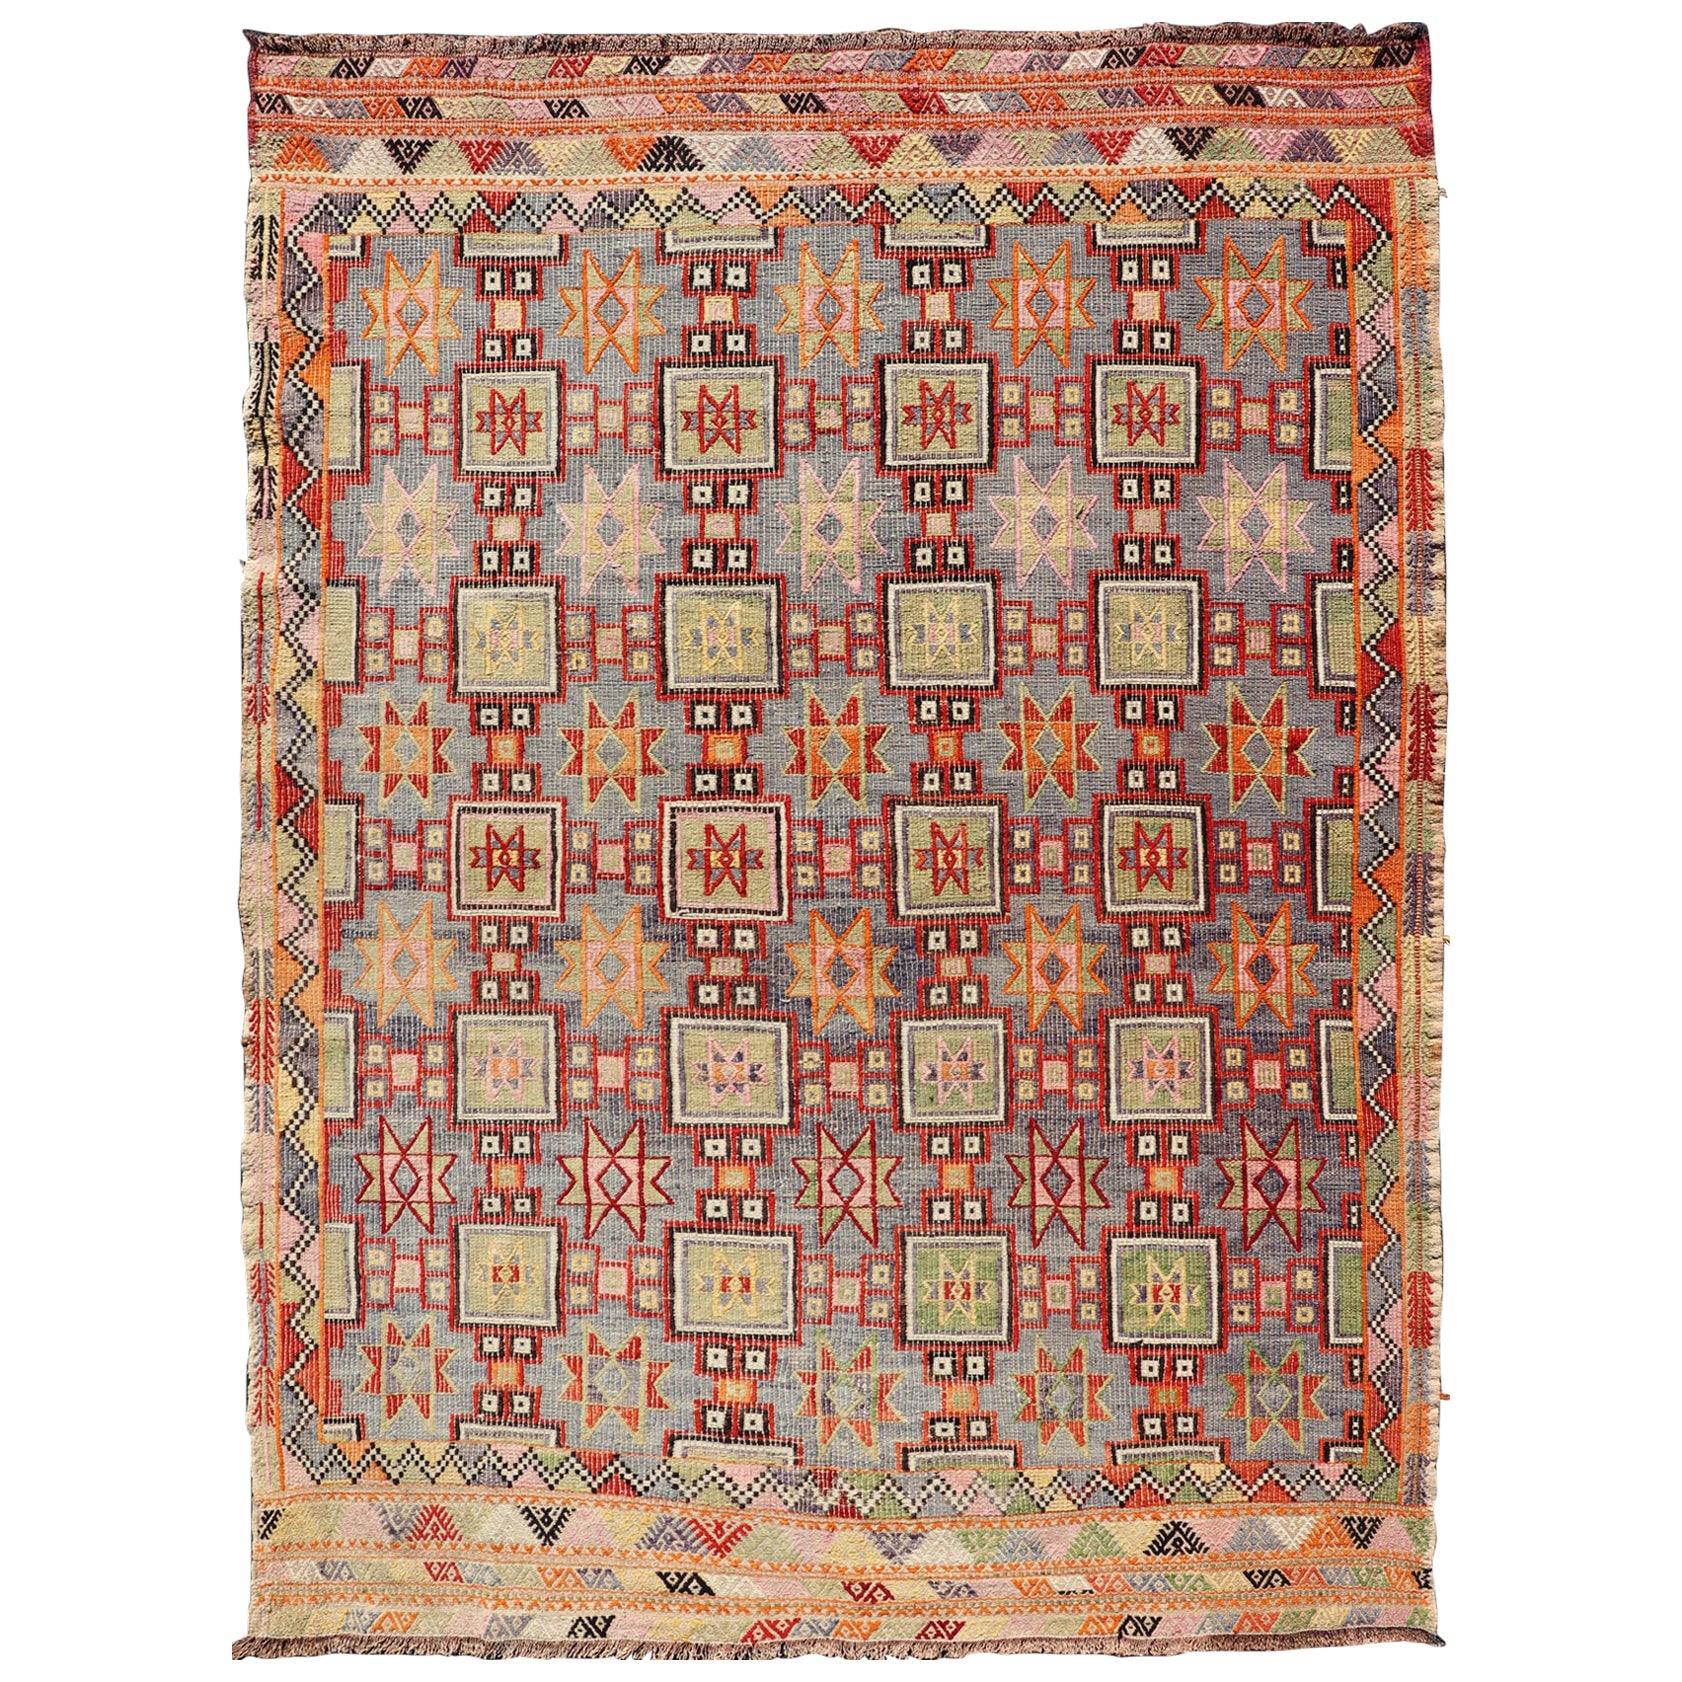 Colorful Vintage Turkish Kilim Embroidered with Star Design in Gray and Green